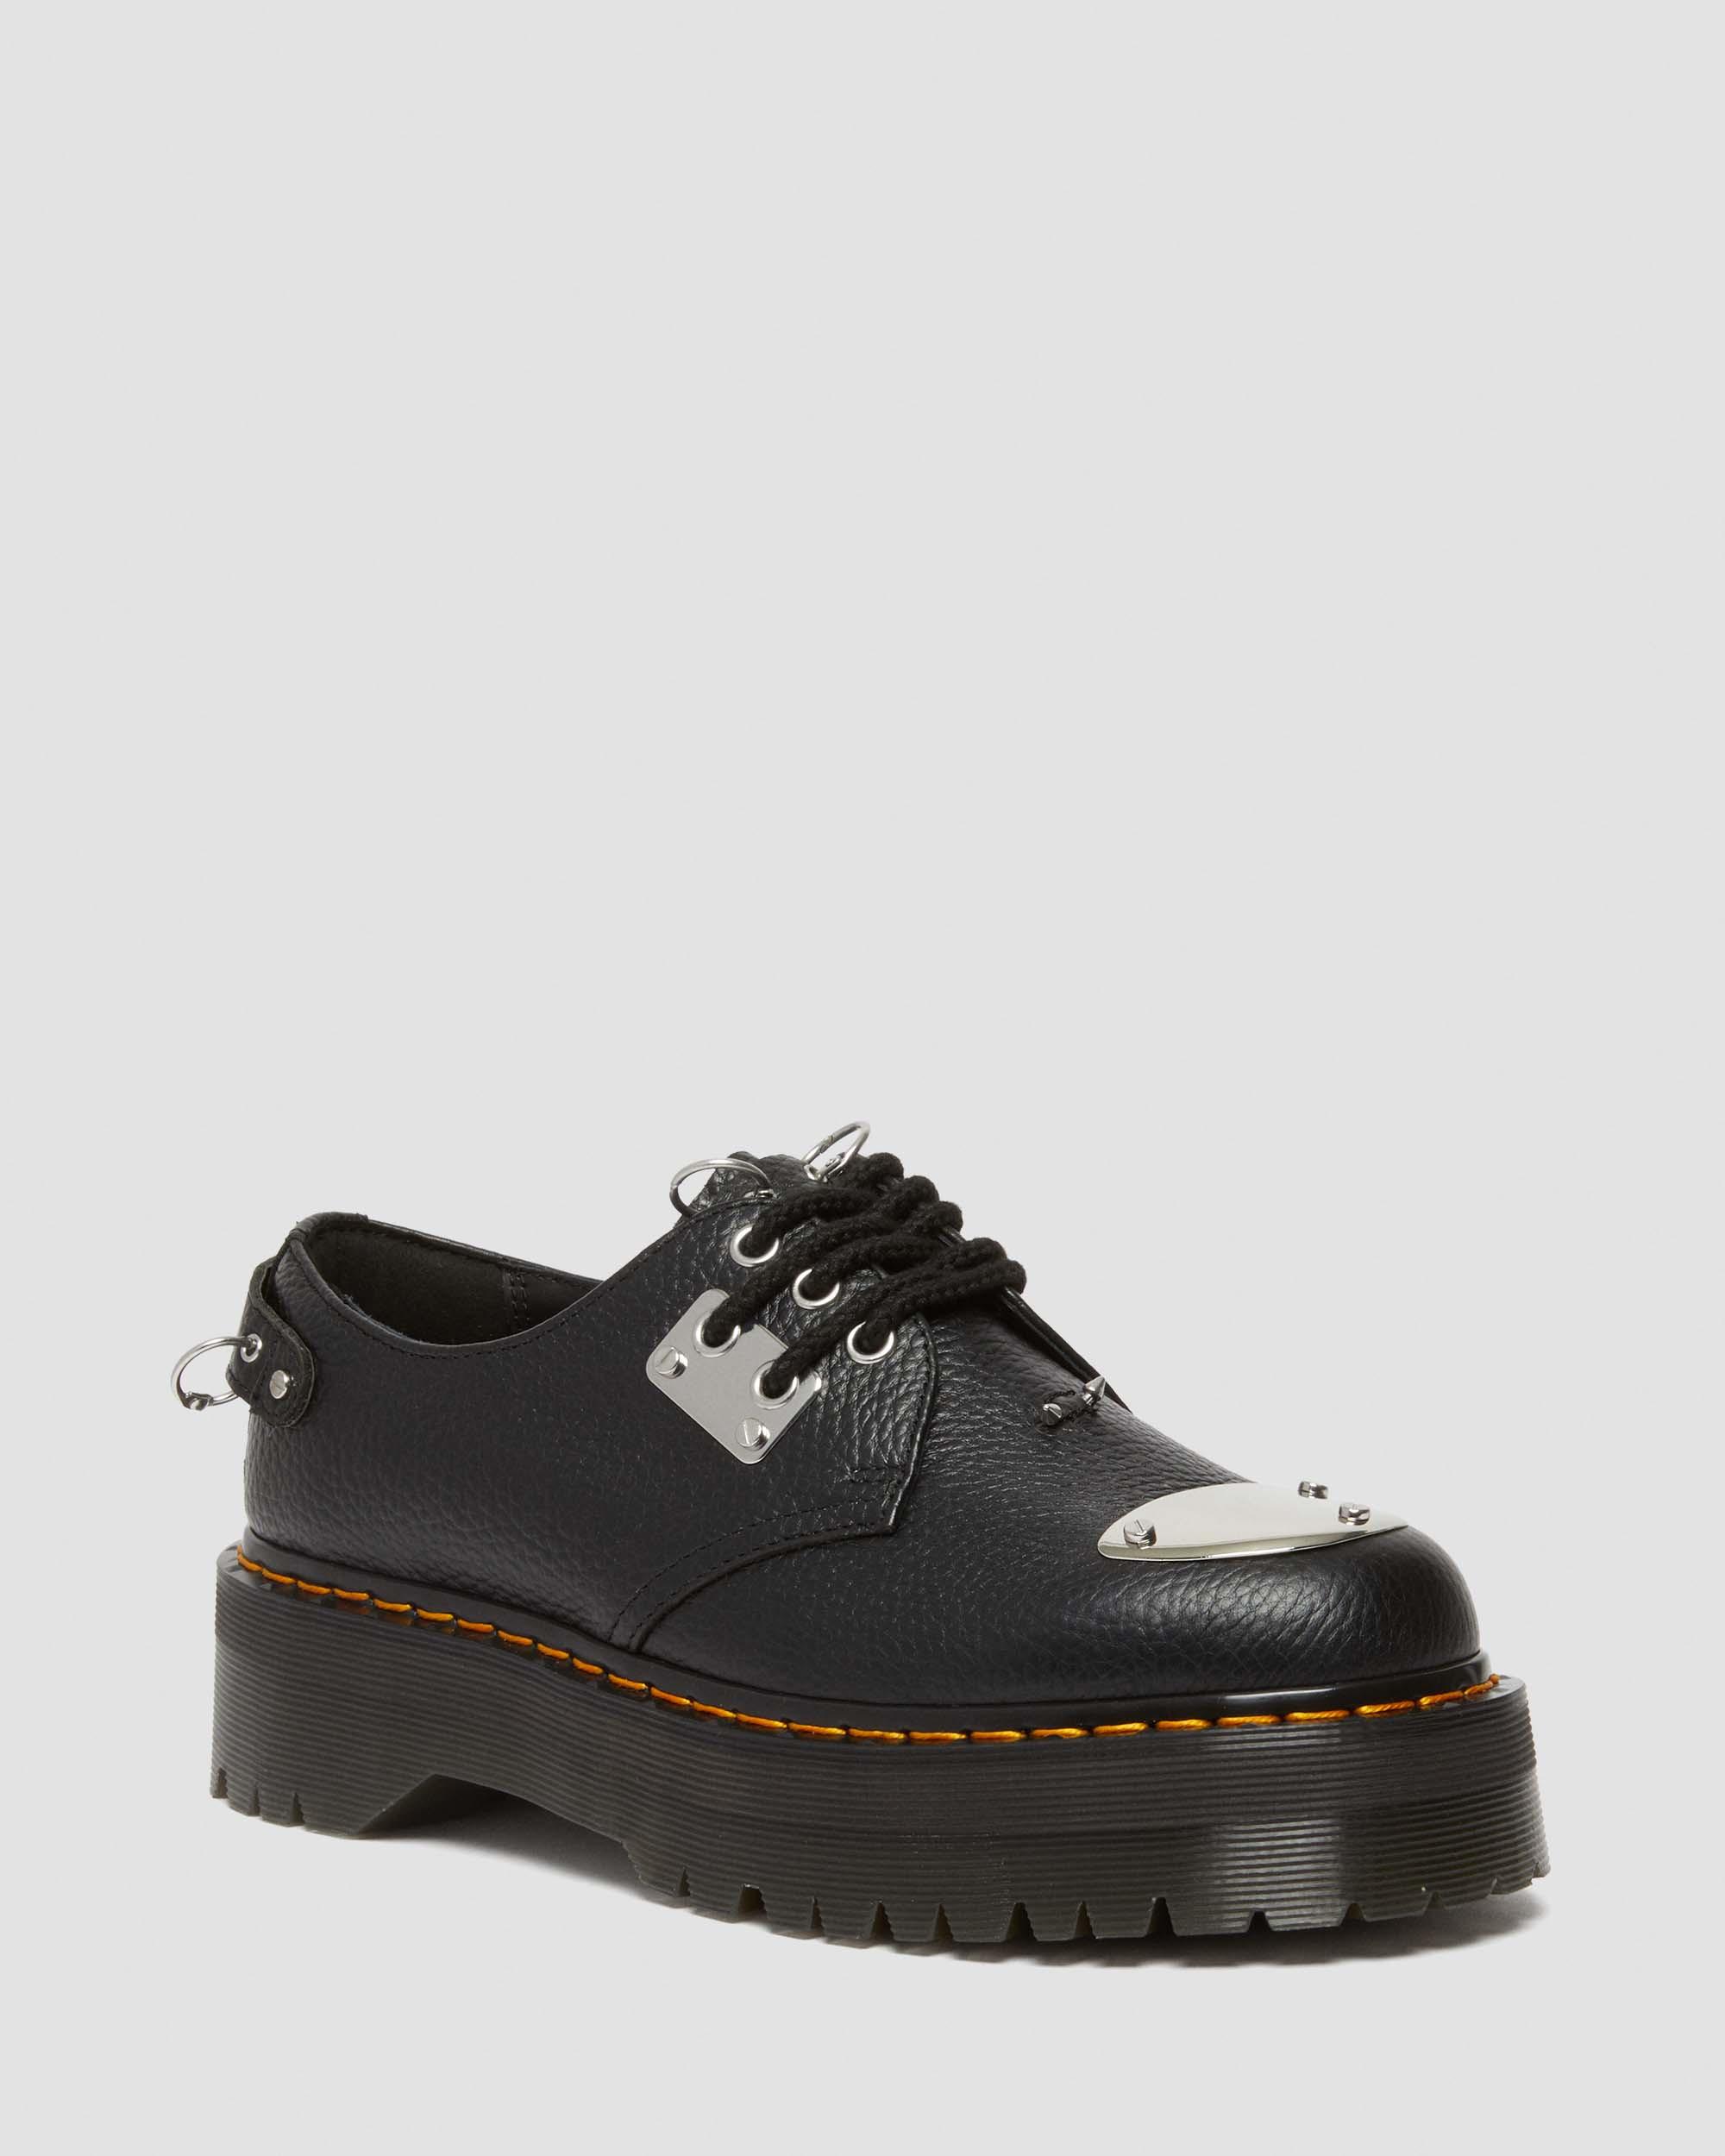 1461 Bex Crazy Horse Leather Oxford Shoes in Dark Brown | Dr. Martens